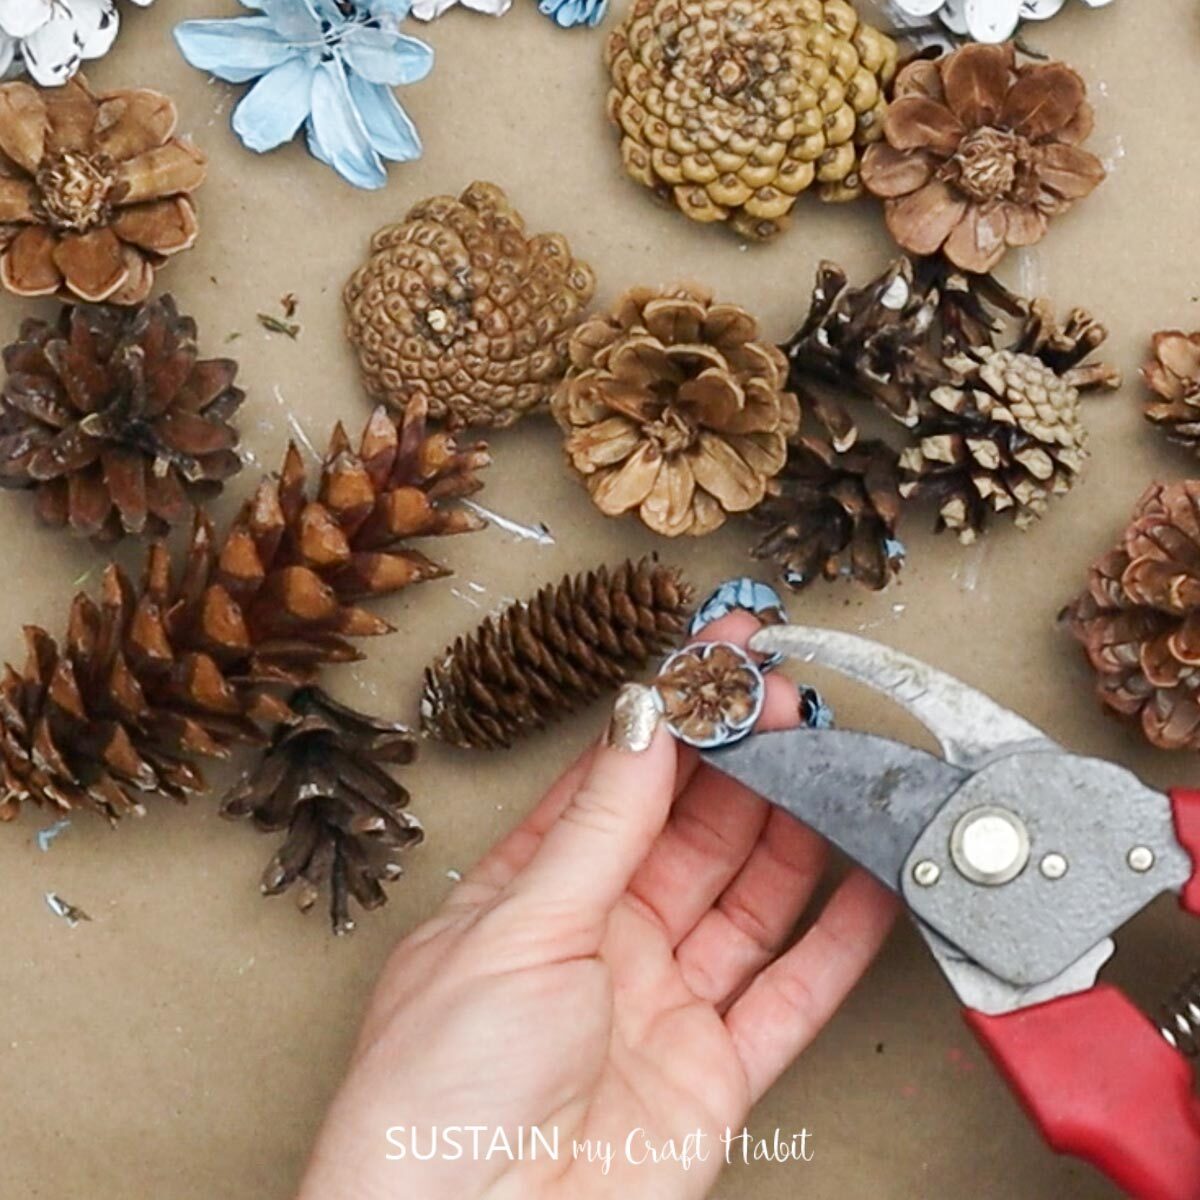 Cutting pinecones with garden snips.